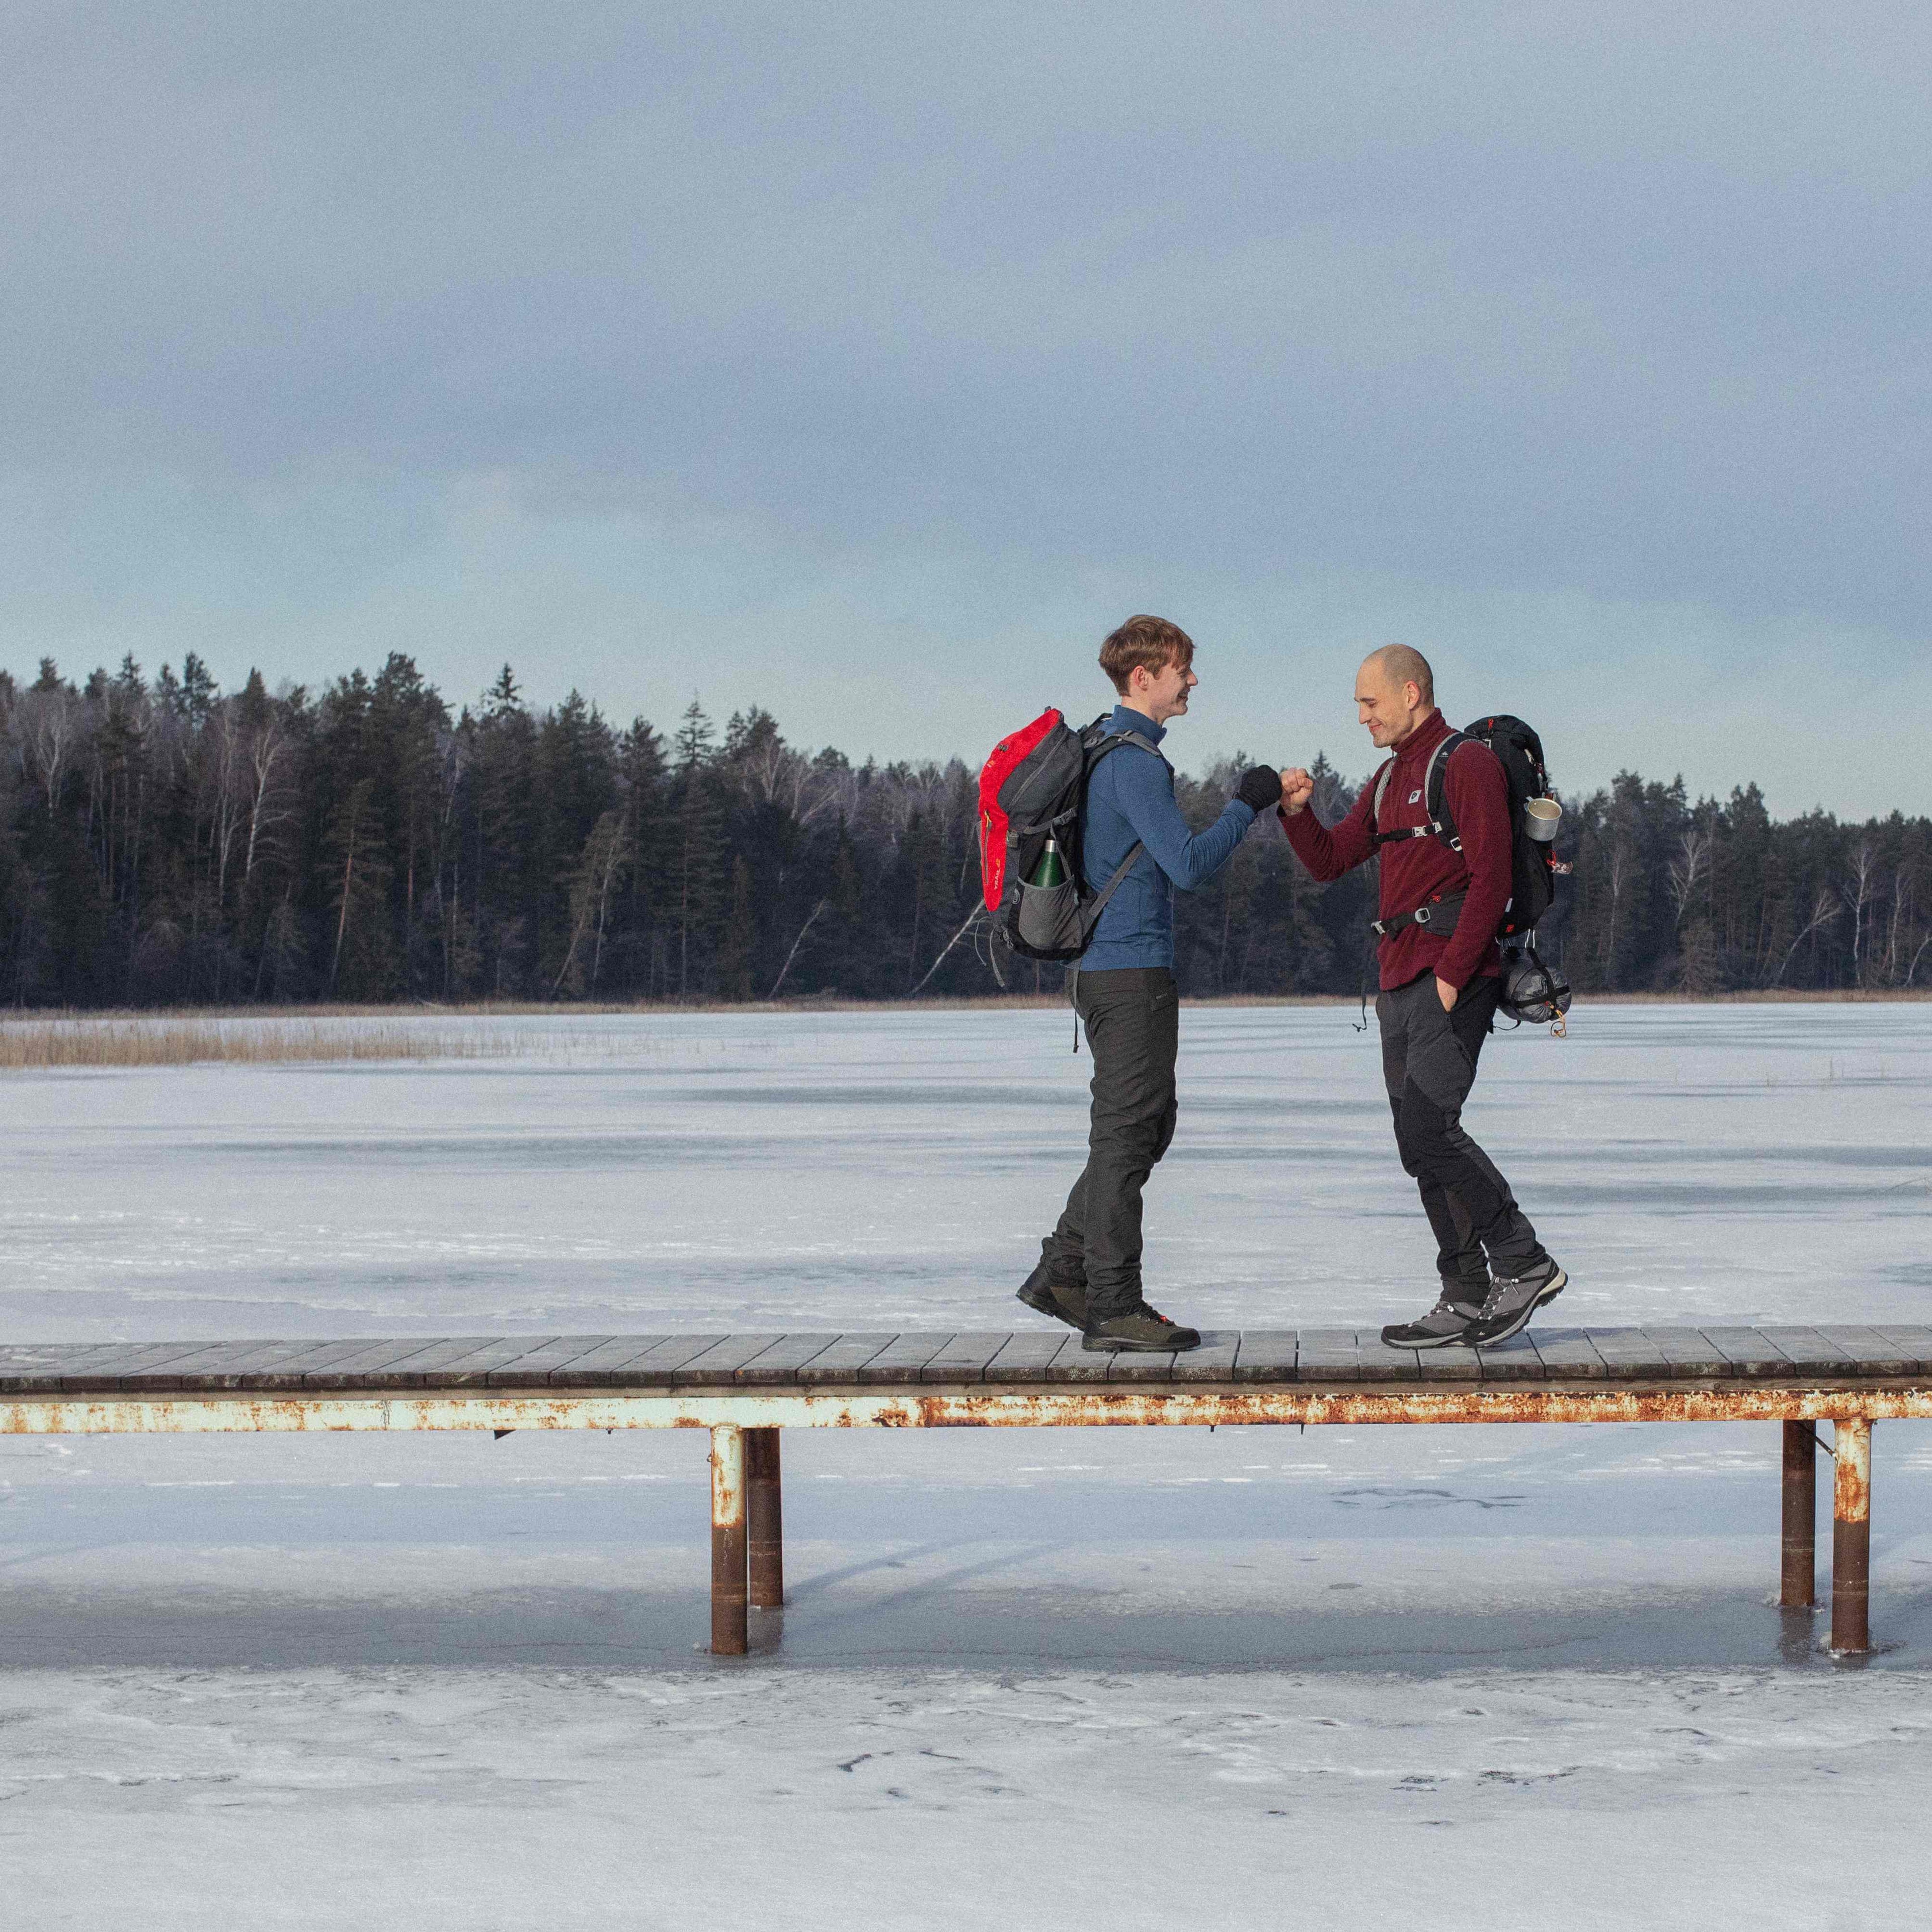 two-men-shakes-hands-on-the-bridge-above-frozen-lake-in-winter